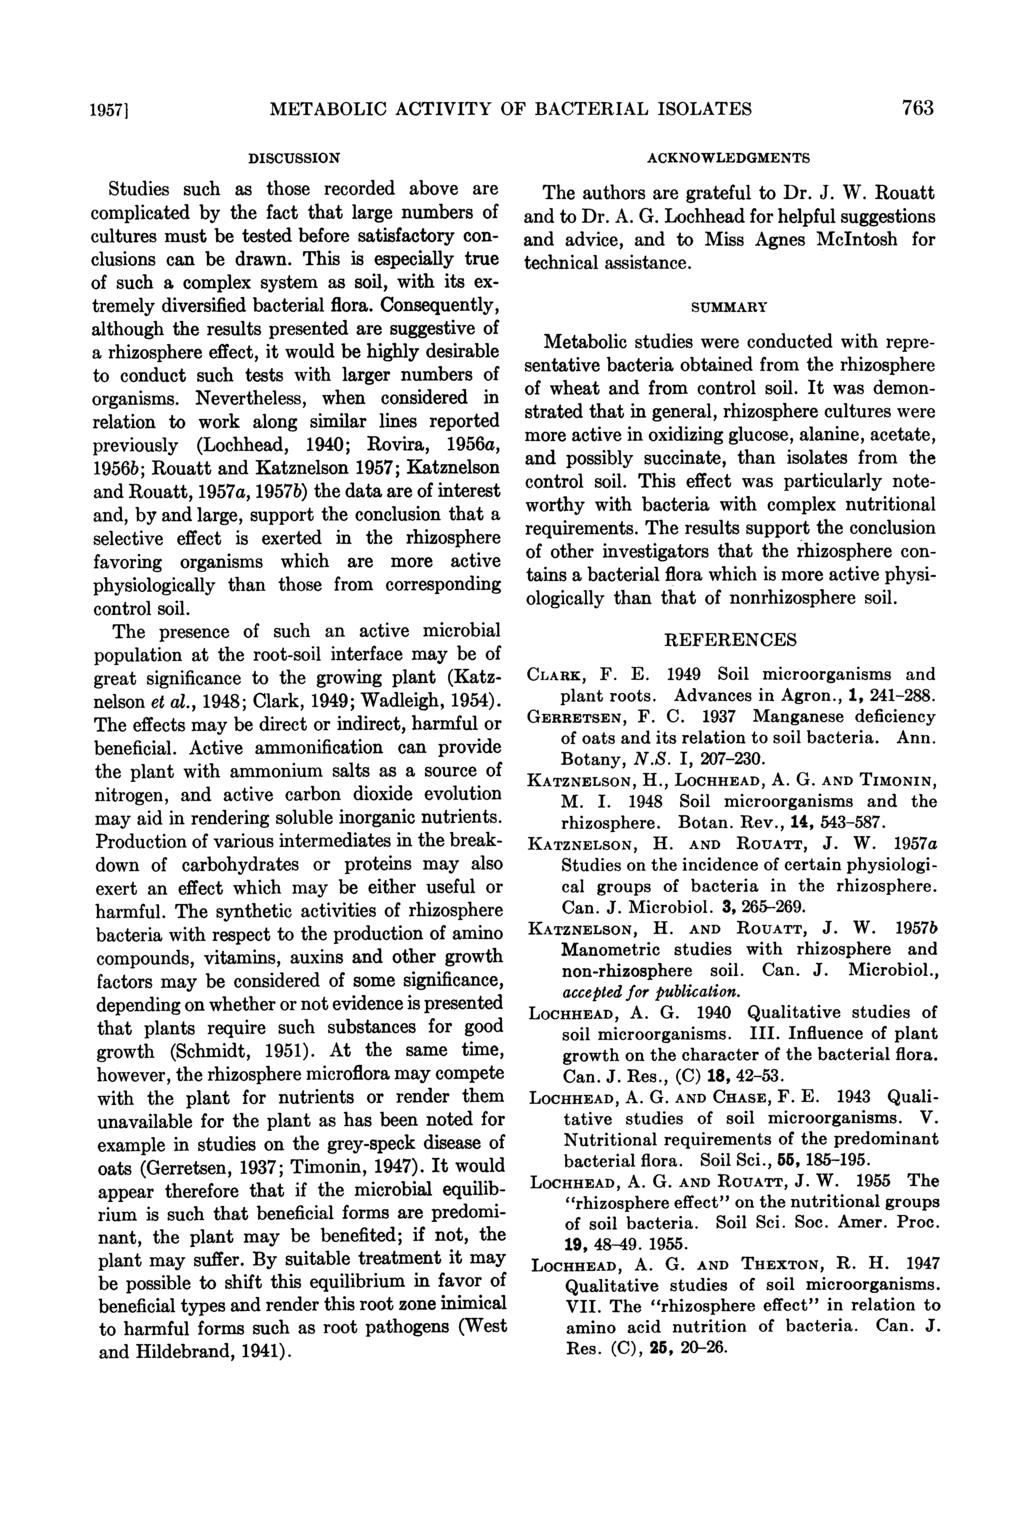 19571 METABOLIC ACTIVITY OF BACTERIAL ISOLATES 763 DISCUSSION Studies such as those recorded above are complicated by the fact that large numbers of cultures must be tested before satisfactory